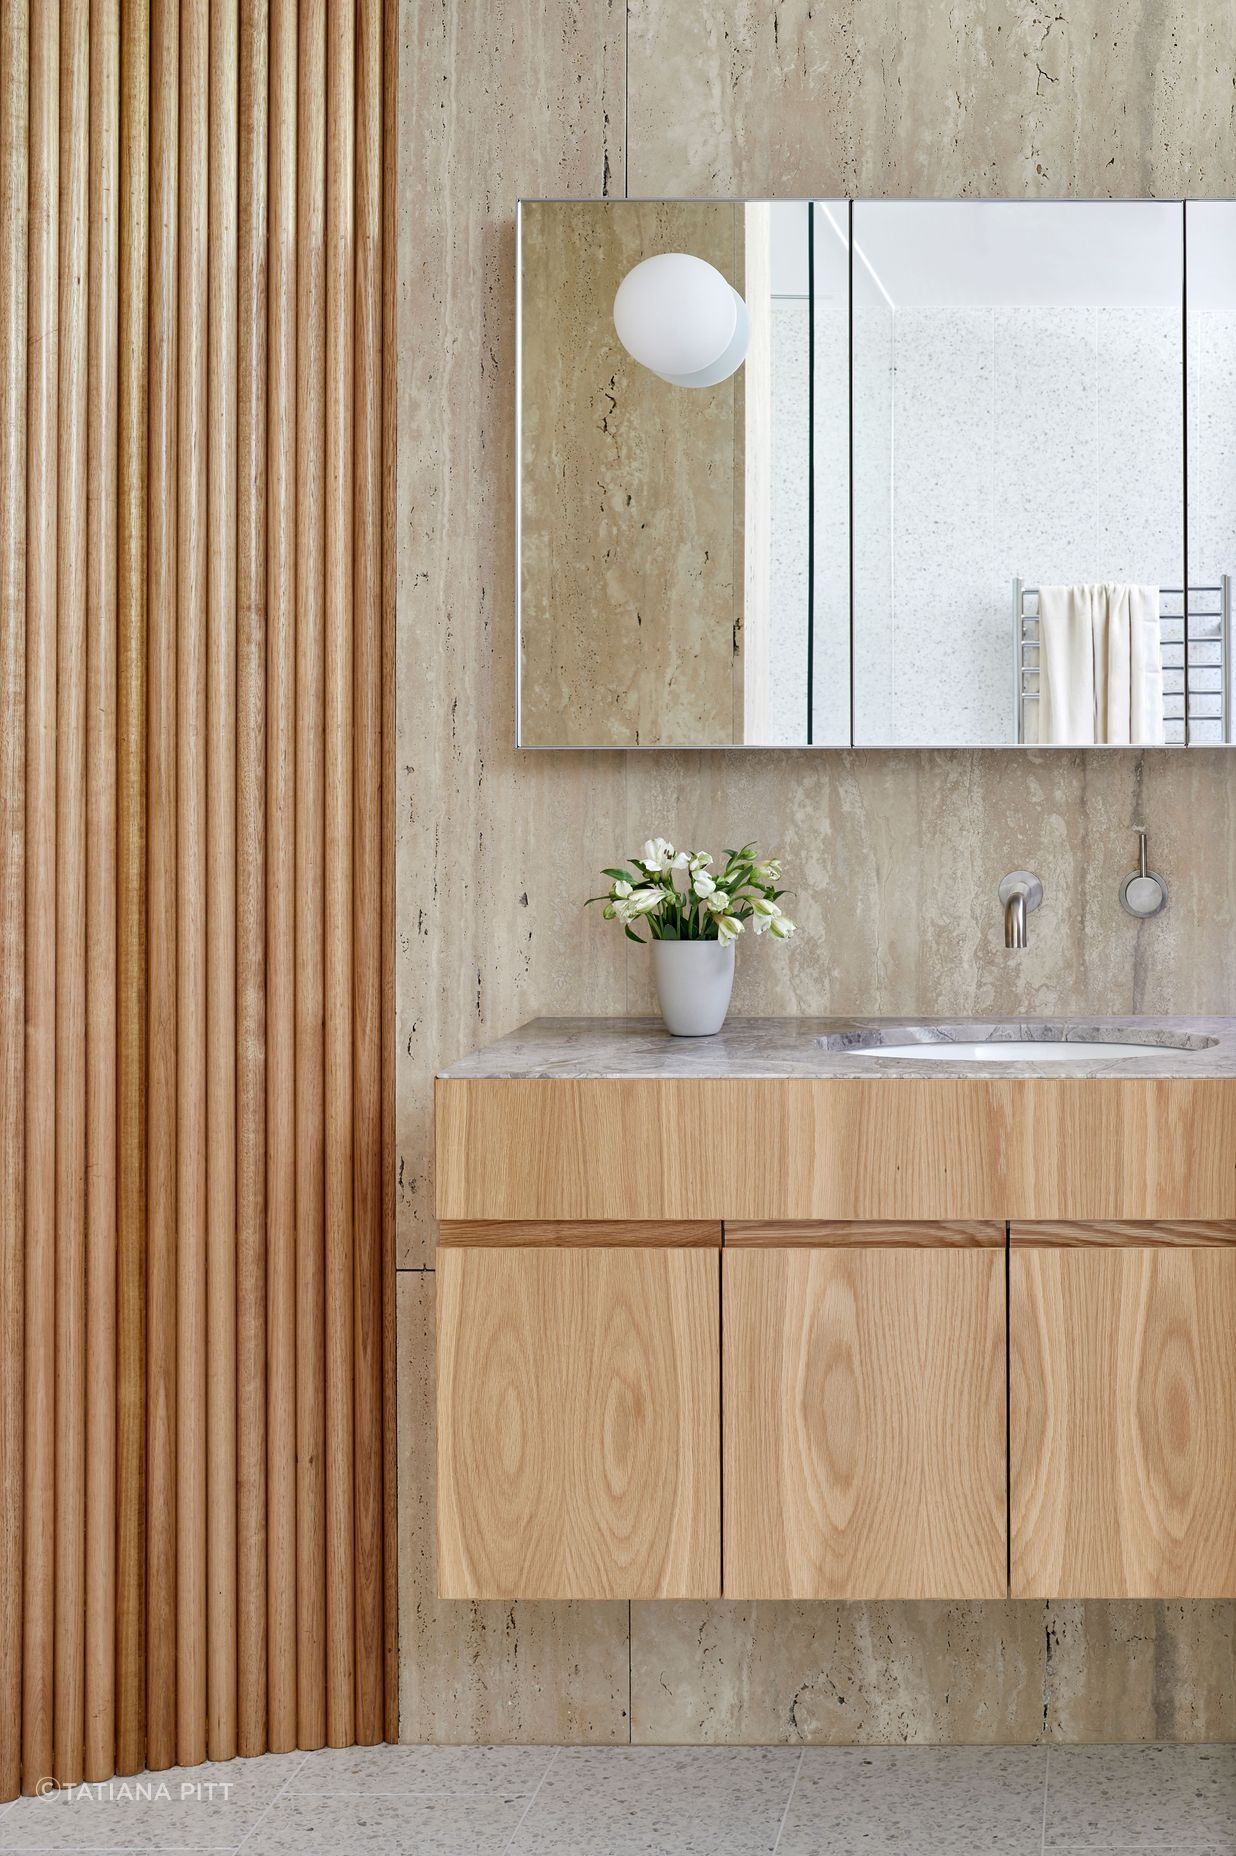 The bathrooms combine timber, terrazzo floor tiles, limestone and marble, bringing interest at every turn.